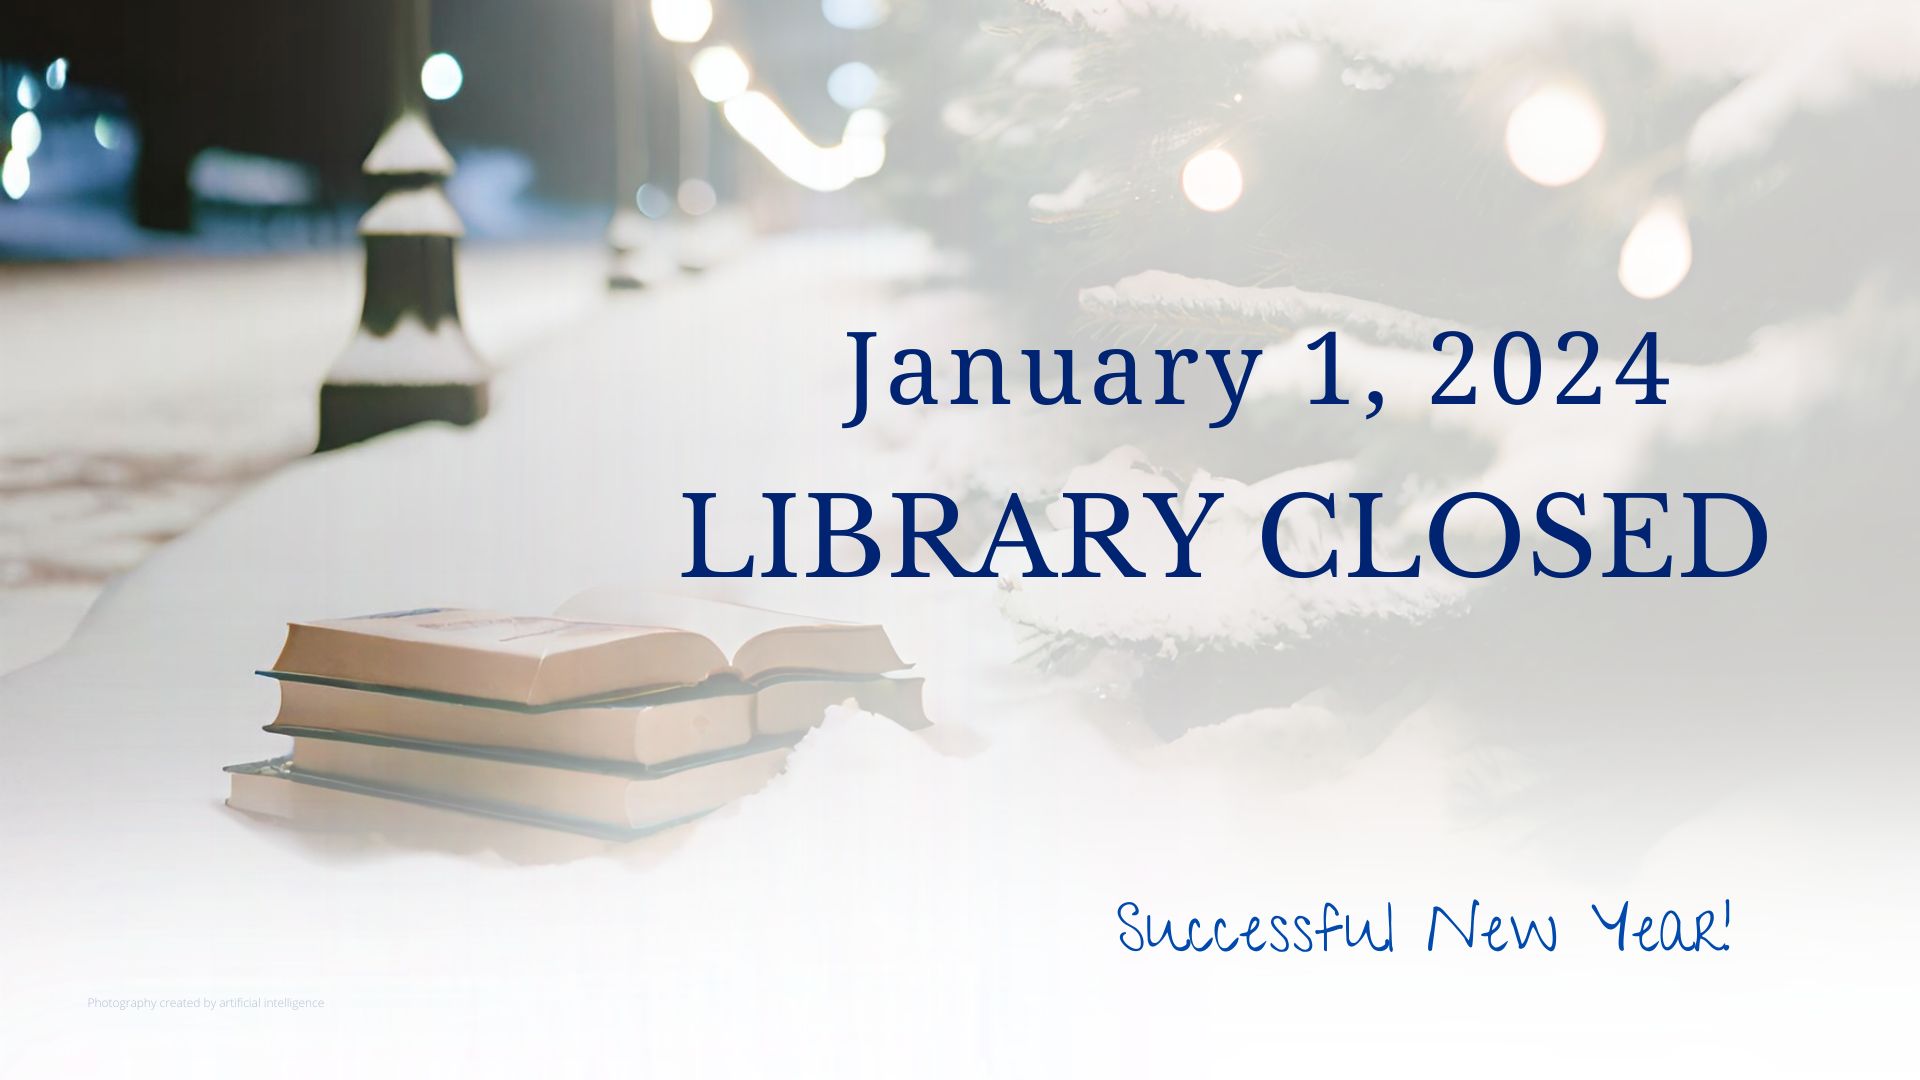 On Monday 1 January, 2024 library closed. Happy New Year!